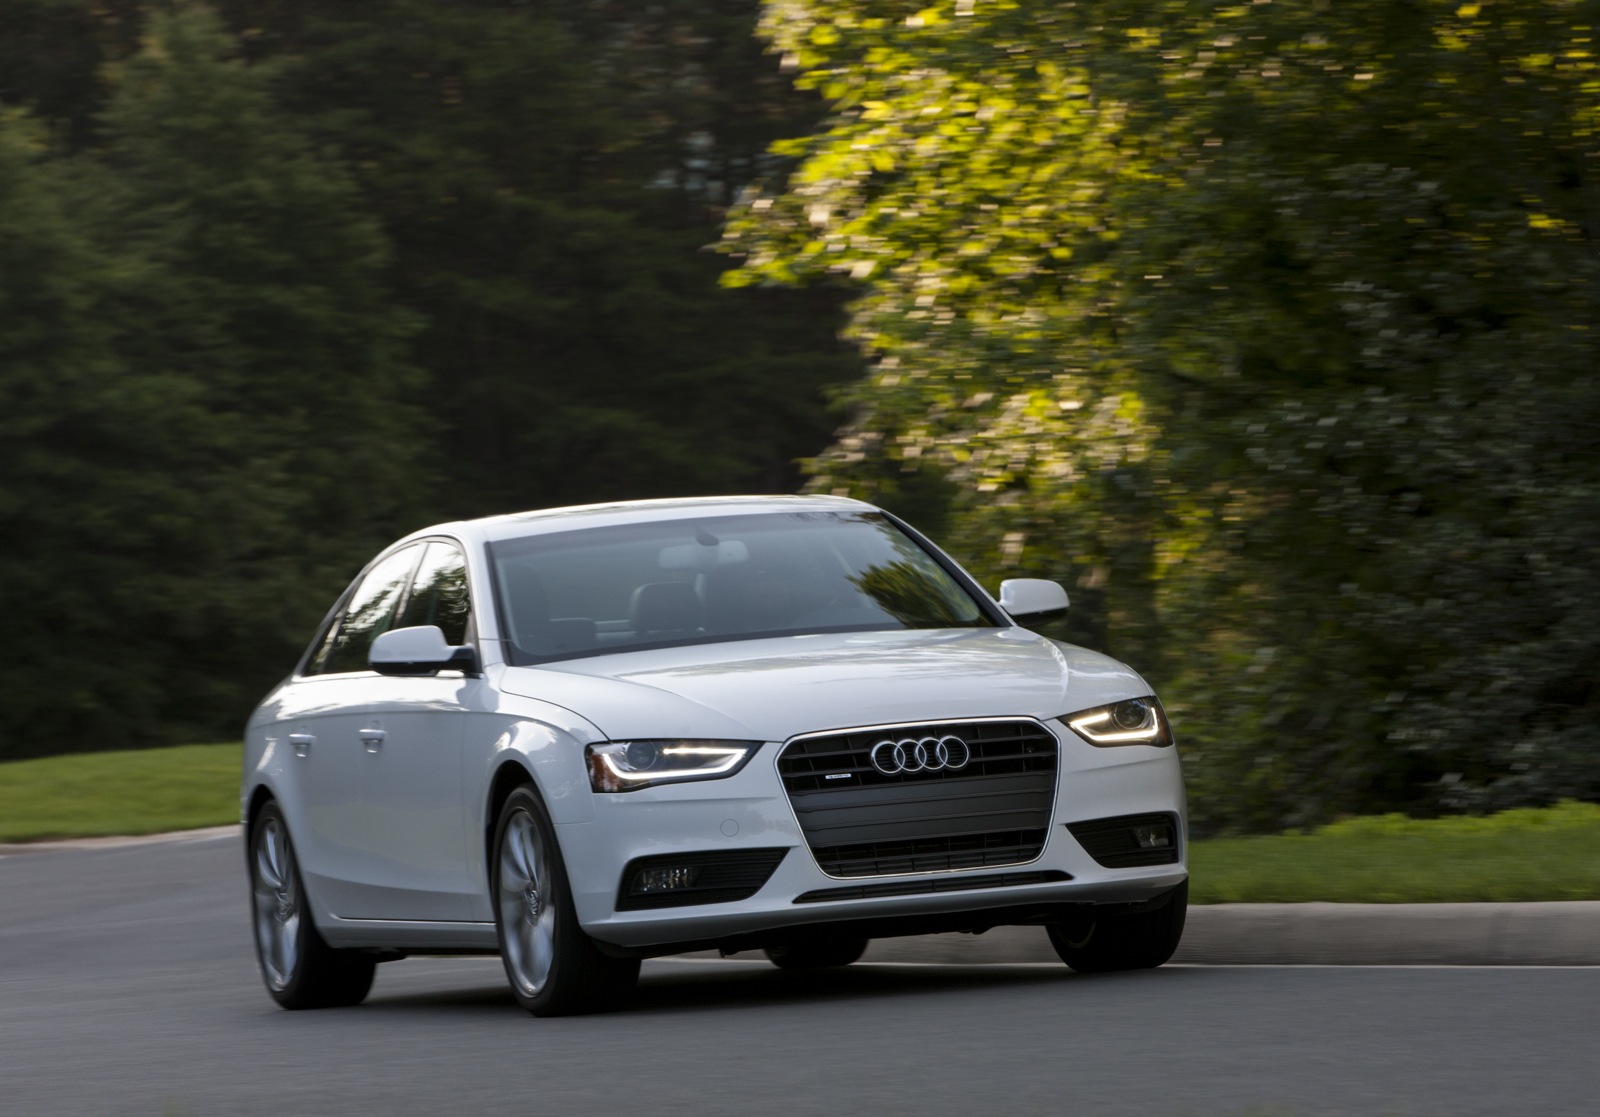 2013 Audi A4 Review, Ratings, Specs, Prices, and Photos - The Car Connection